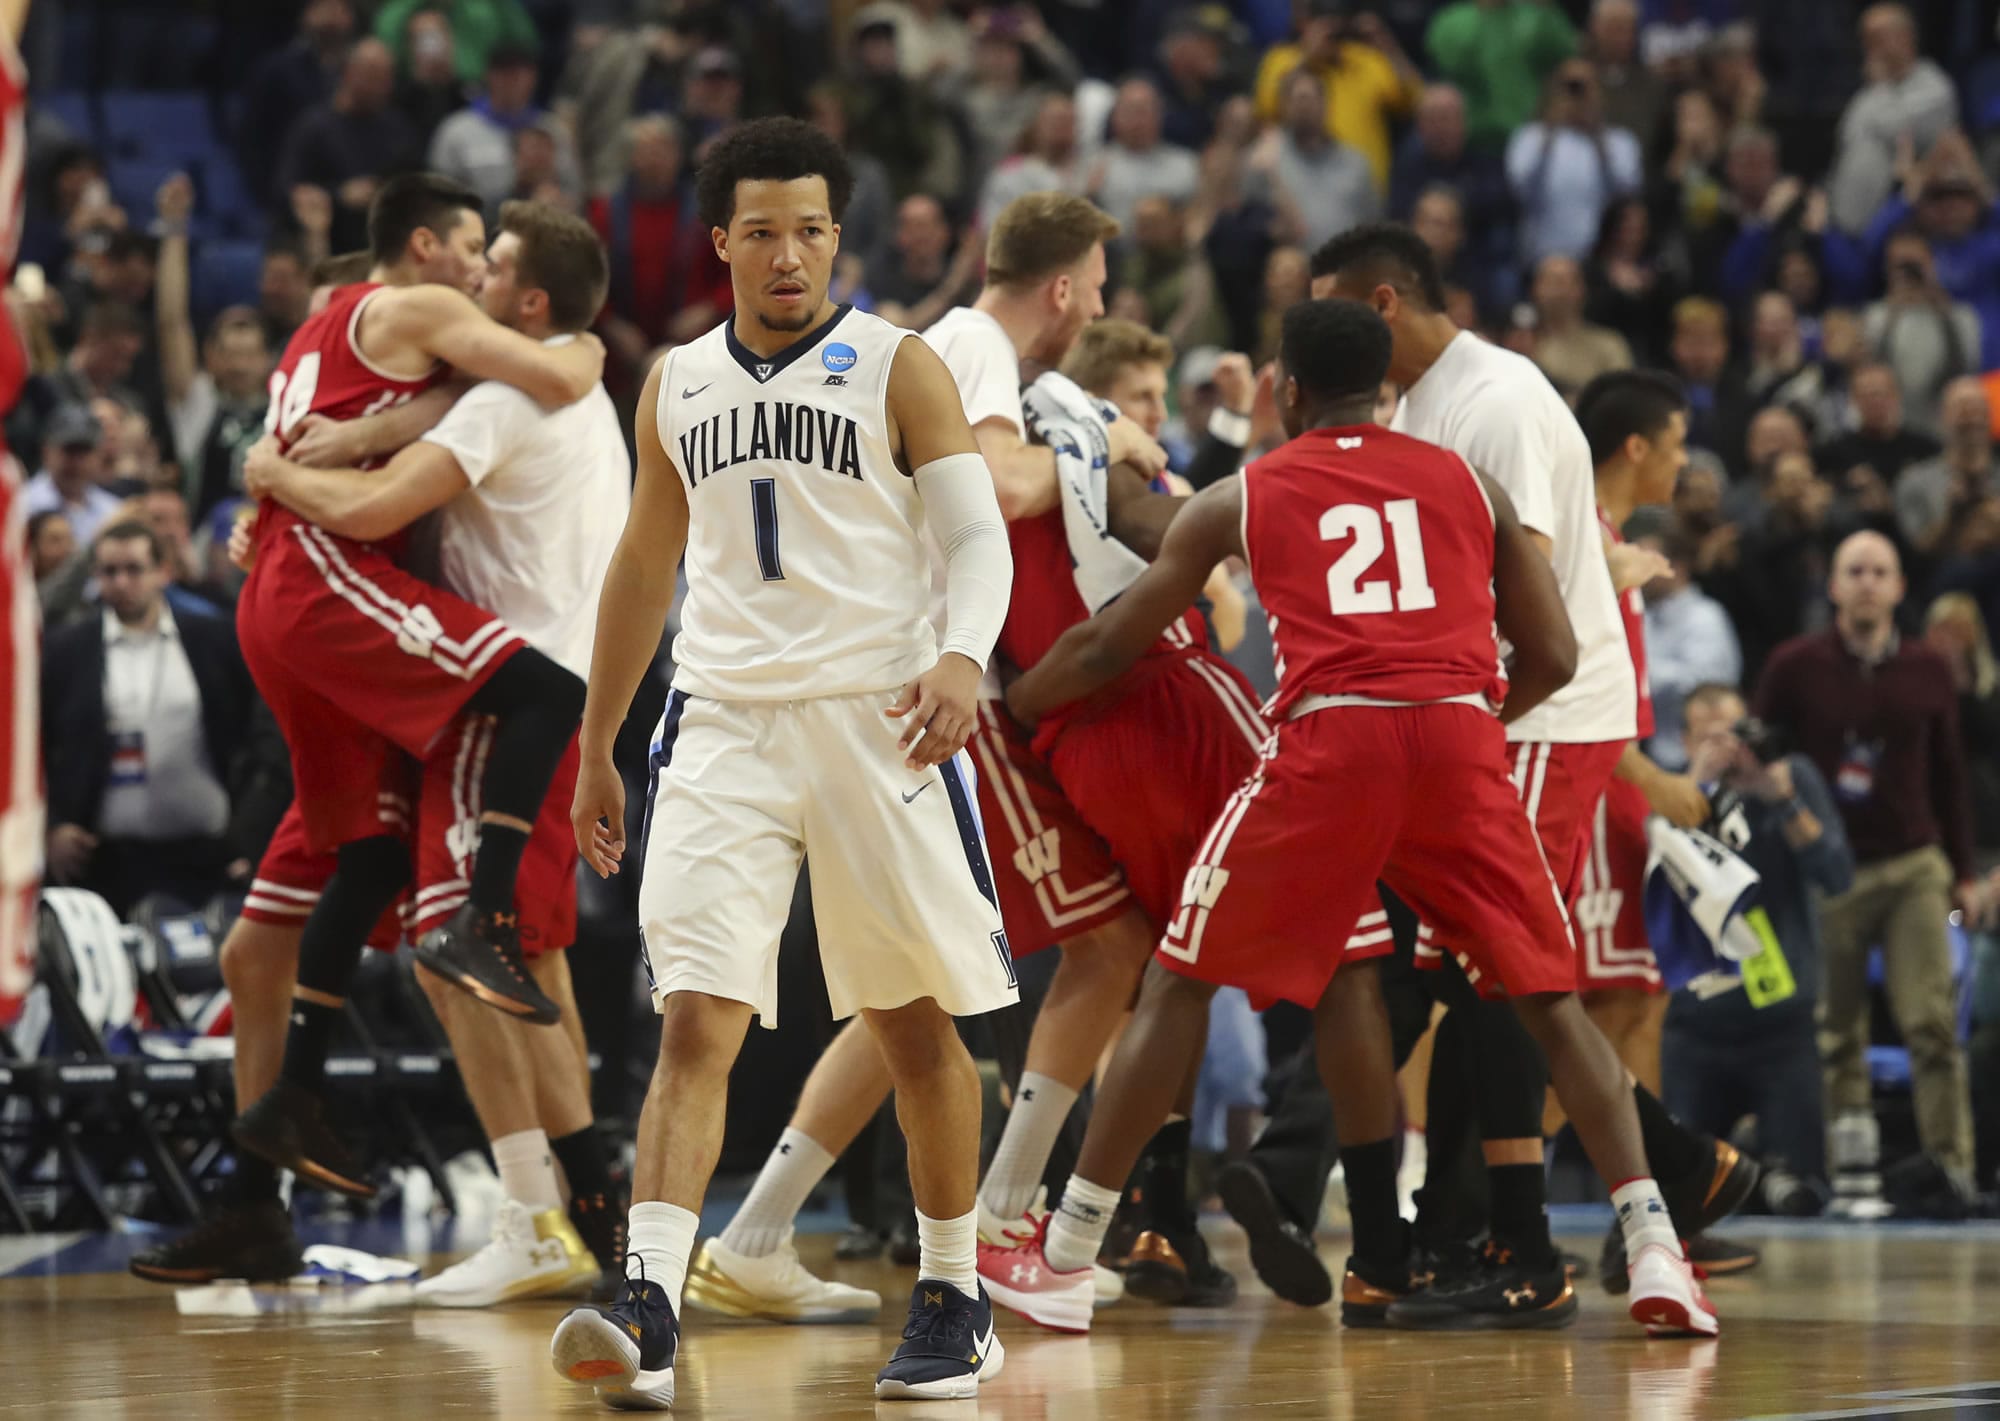 Villanova guard Jalen Brunson (1) leaves the court as Wisconsin players celebrate the end of their second-round game in the men's NCAA college basketball tournament, Saturday, March 18, 2017, in Buffalo, N.Y. Wisconsin won 65-62.